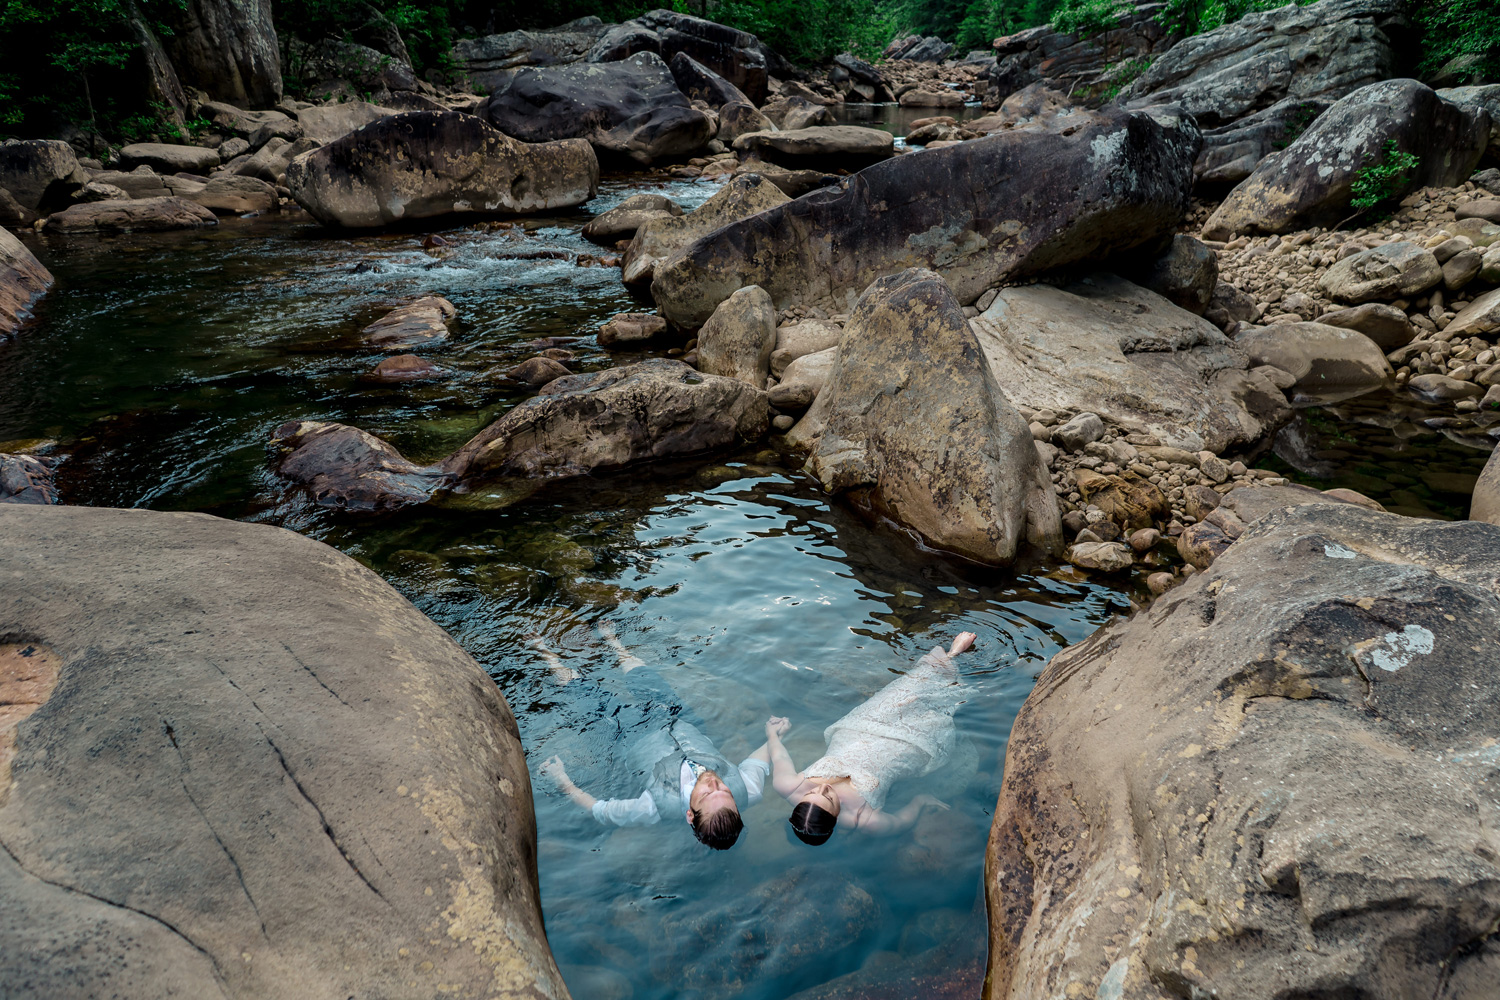 A bride and groom swimming in a river.